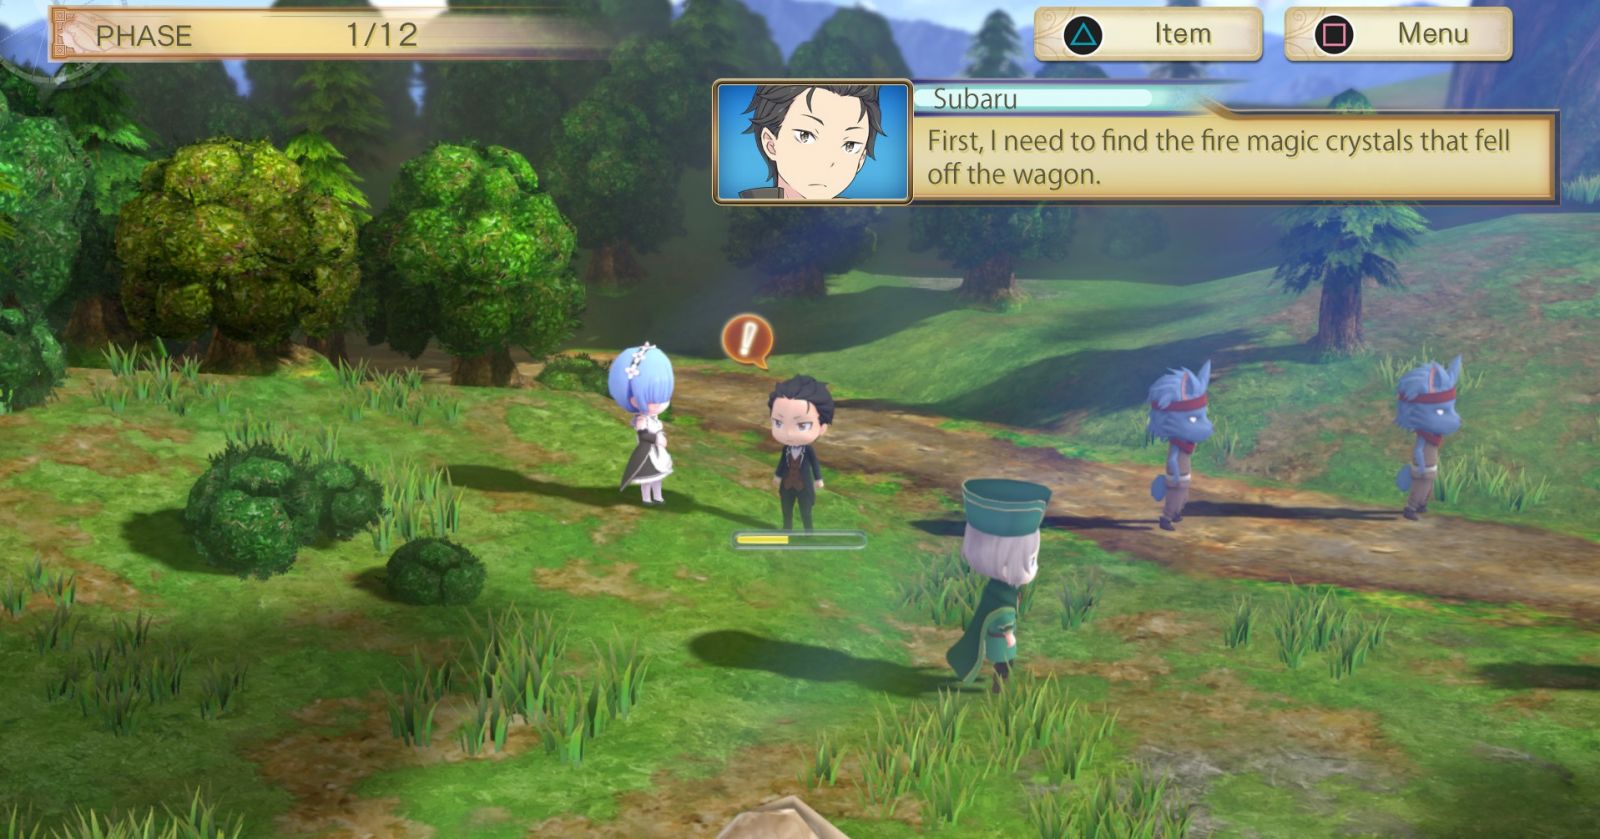 Re:Zero - The Prophecy of the Throne (PS4)